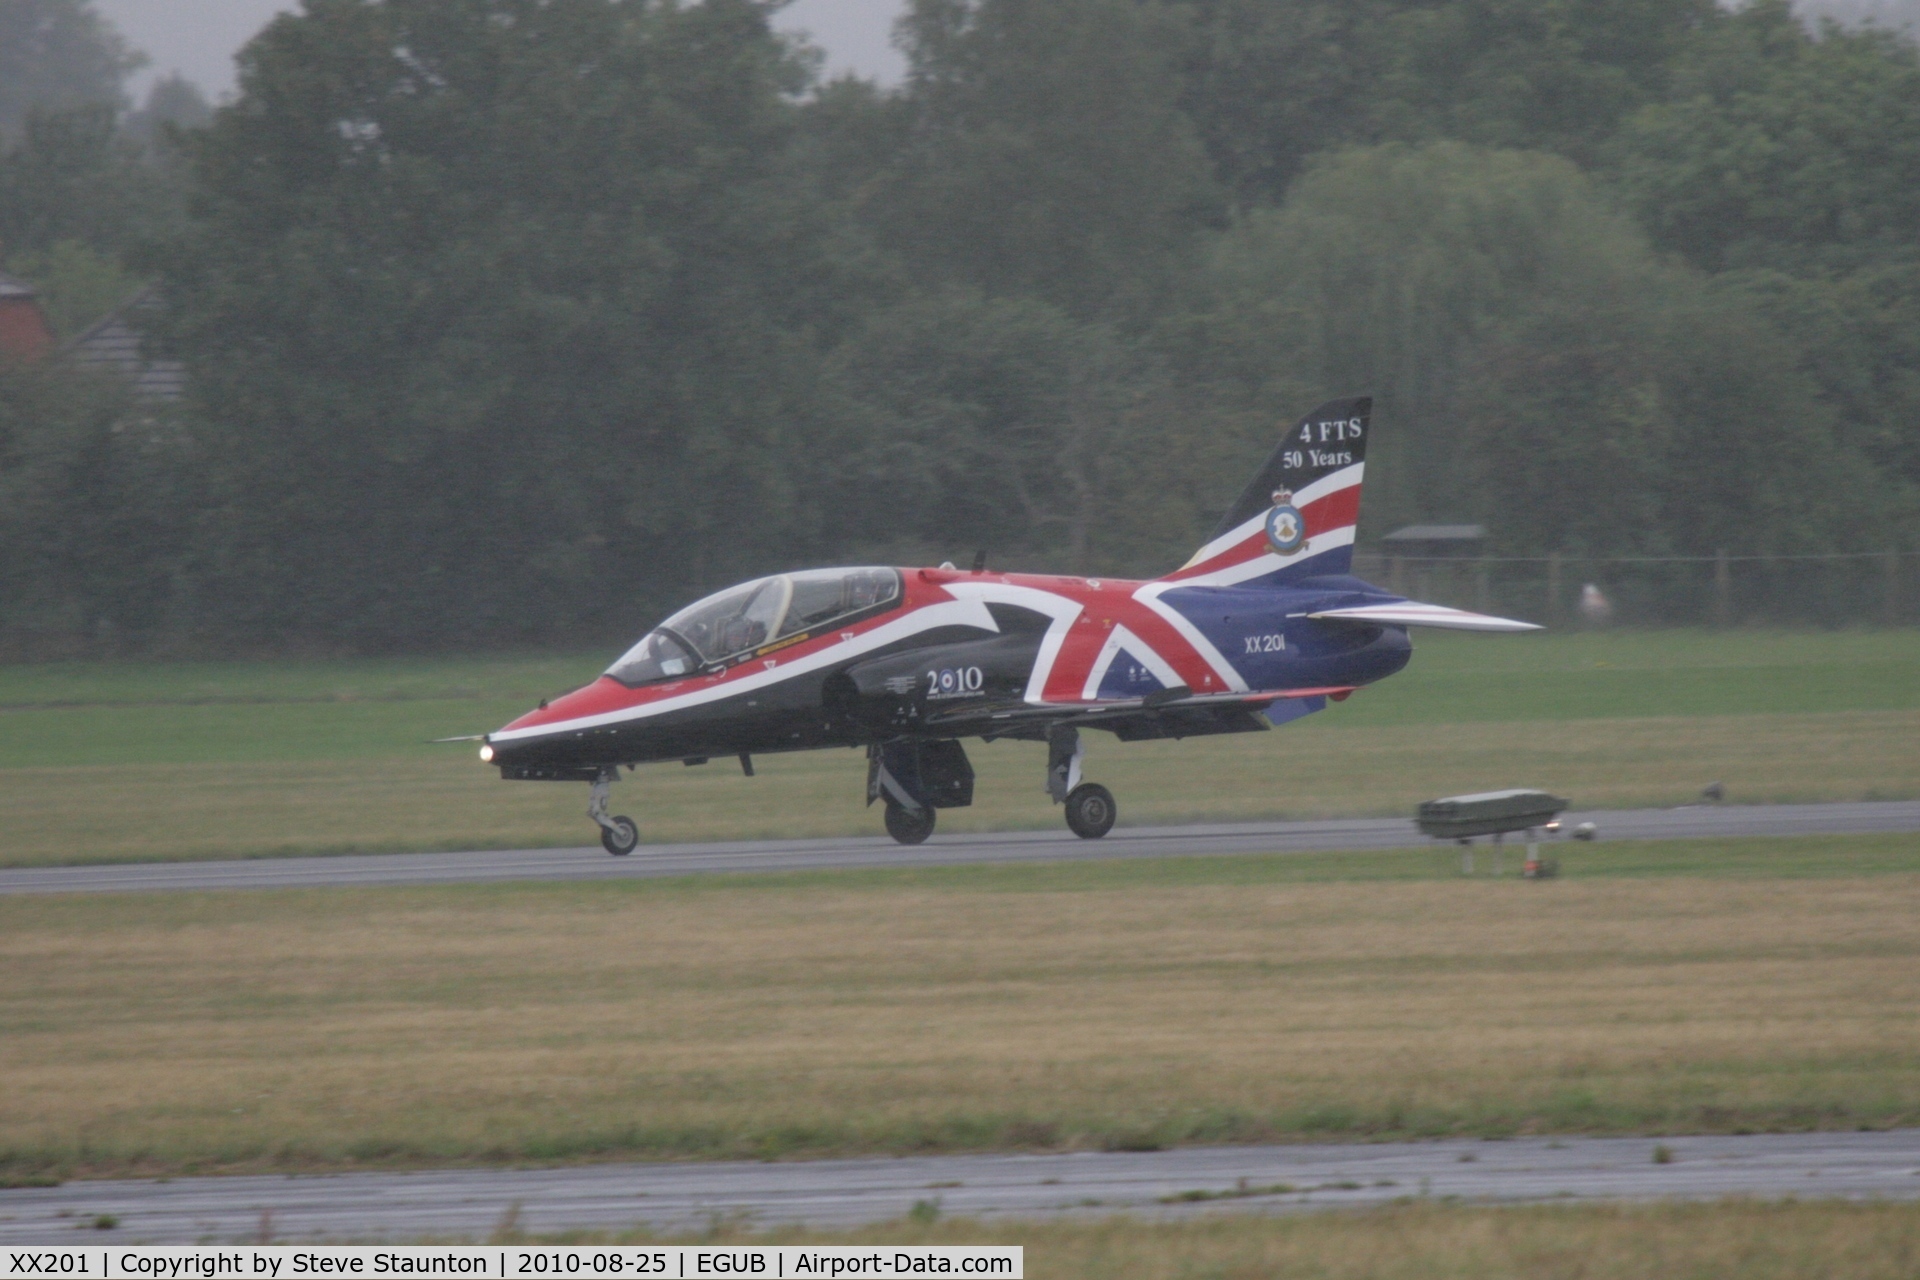 XX201, 1978 Hawker Siddeley Hawk T.1A C/N 048/312048, Taken at RAF Benson Families Day (in the pouring rain) August 2010.